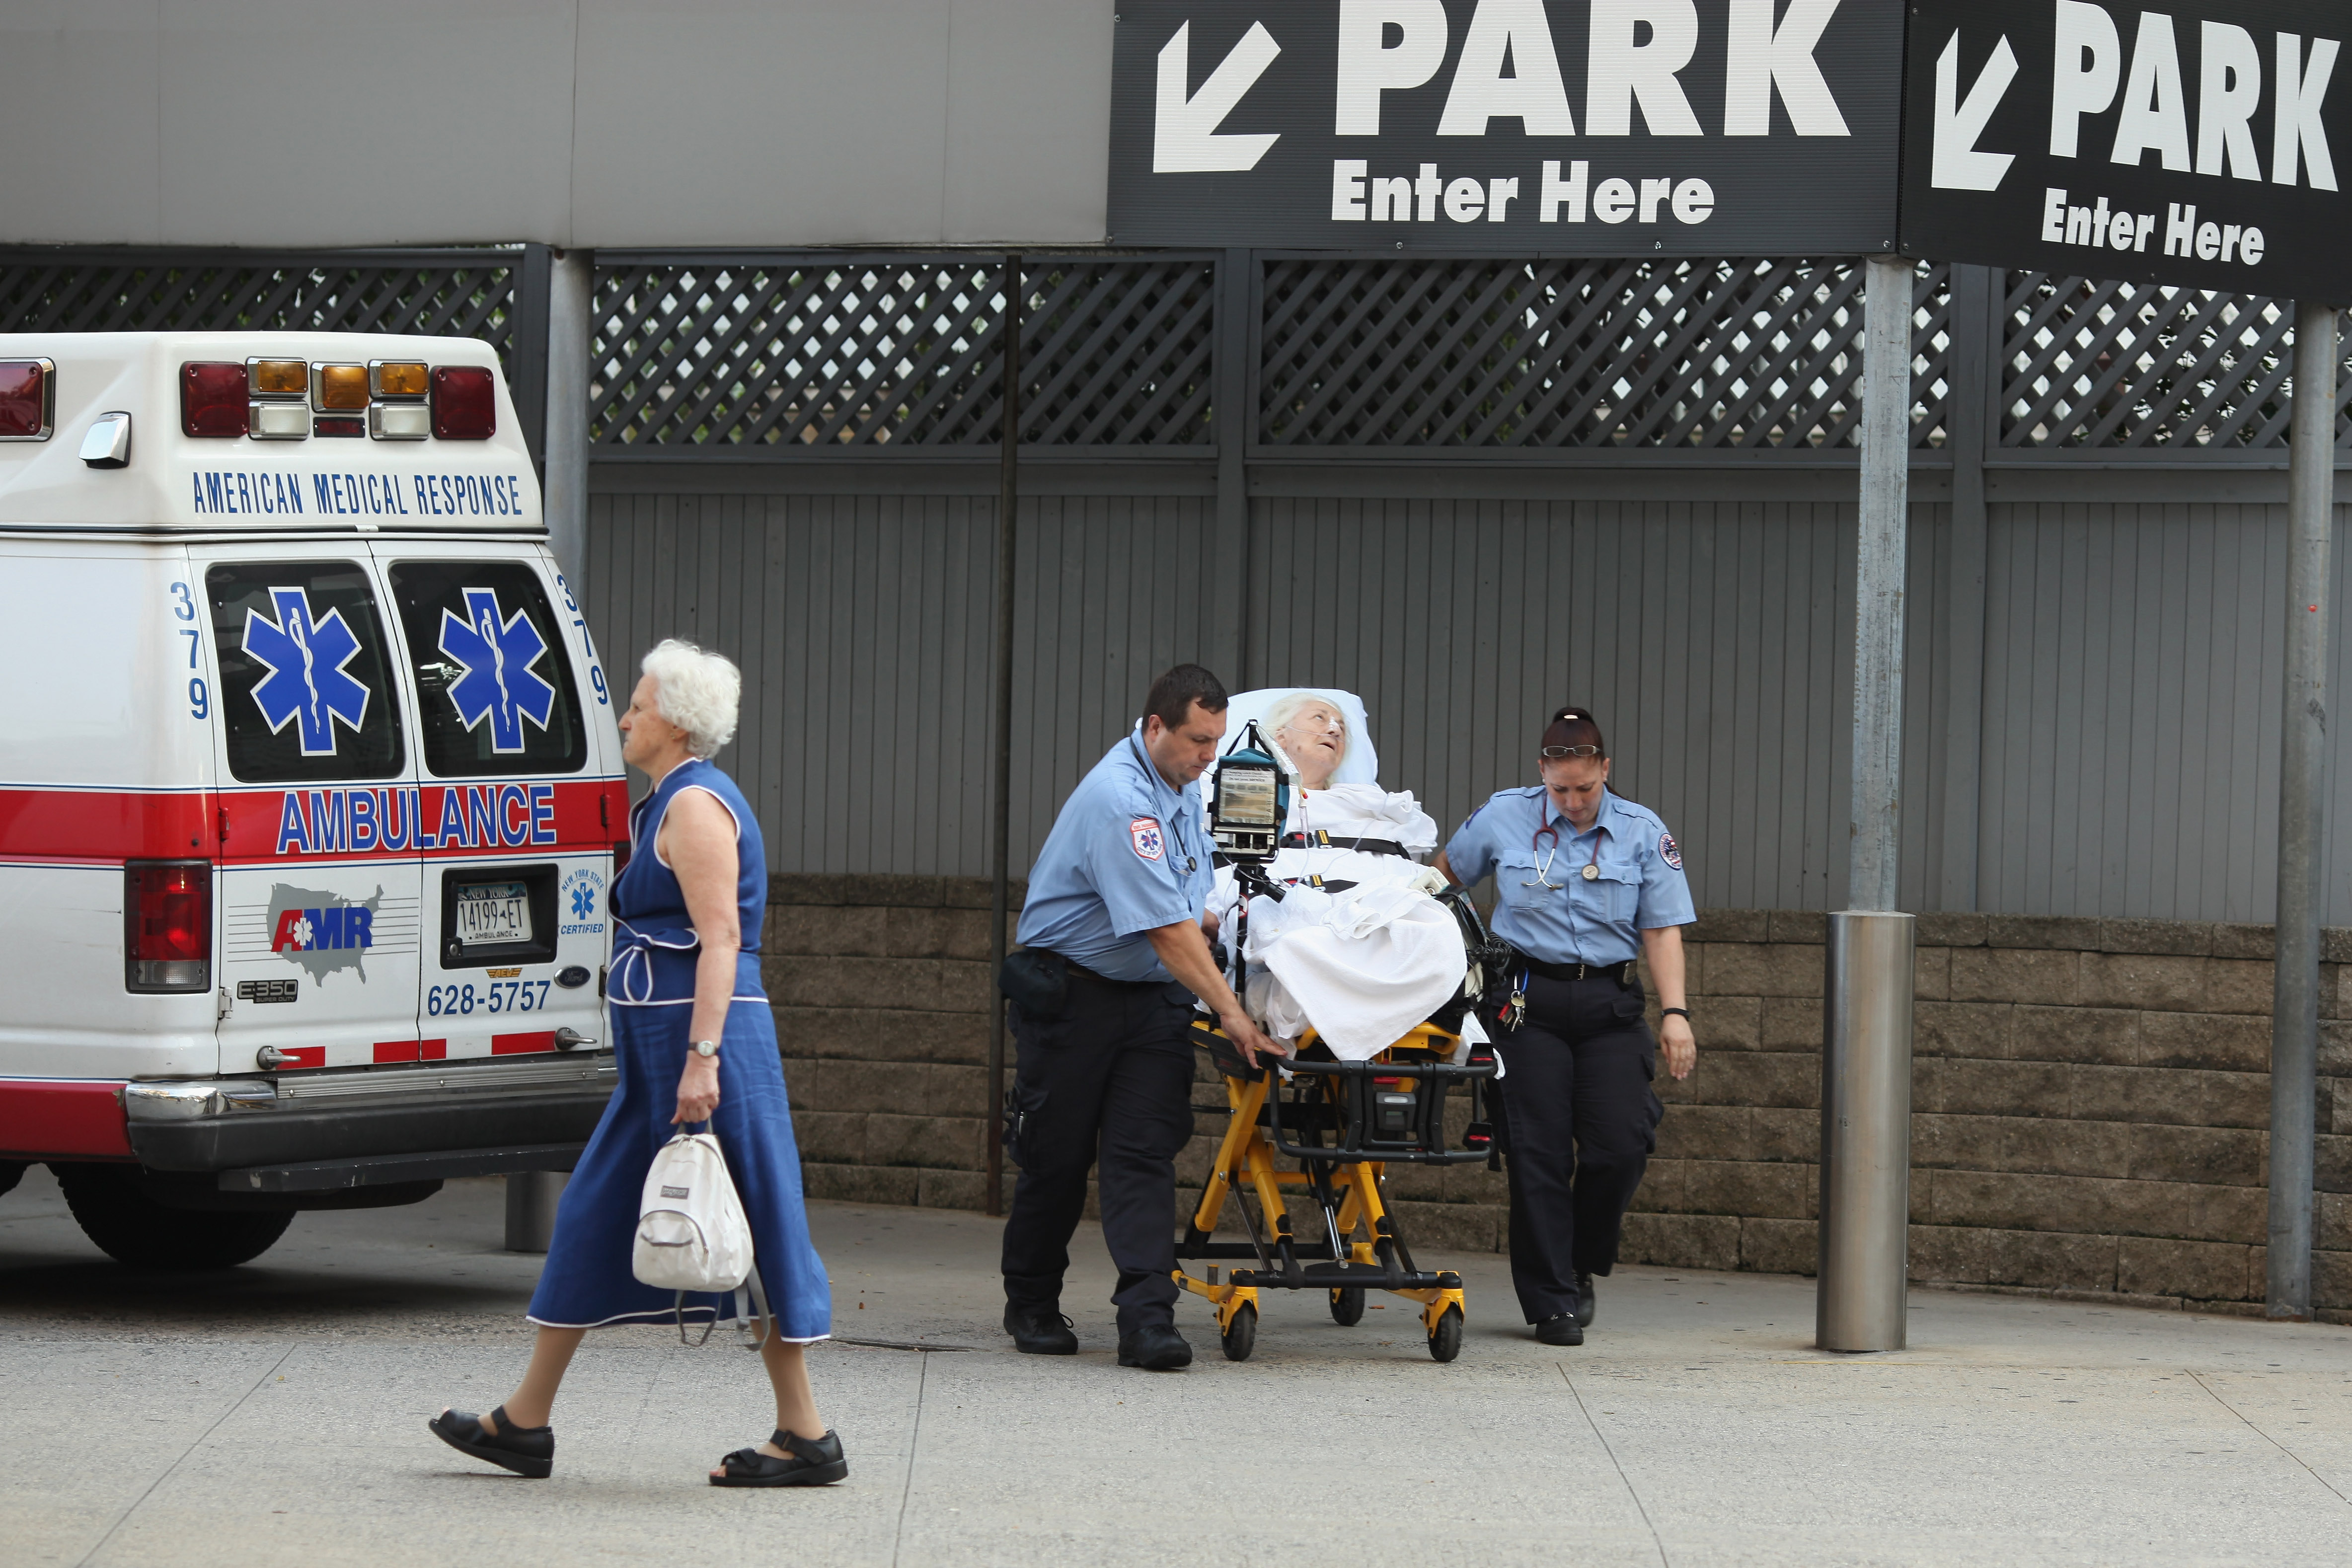 Paramedics and EMTs evacuate patients from NYU Langone Medical Center after the hosptial was ordered to to discharge or move about 400 patients to other hospitals August 26, 2011 in New York City. (Photo by Chip Somodevilla/Getty Images)